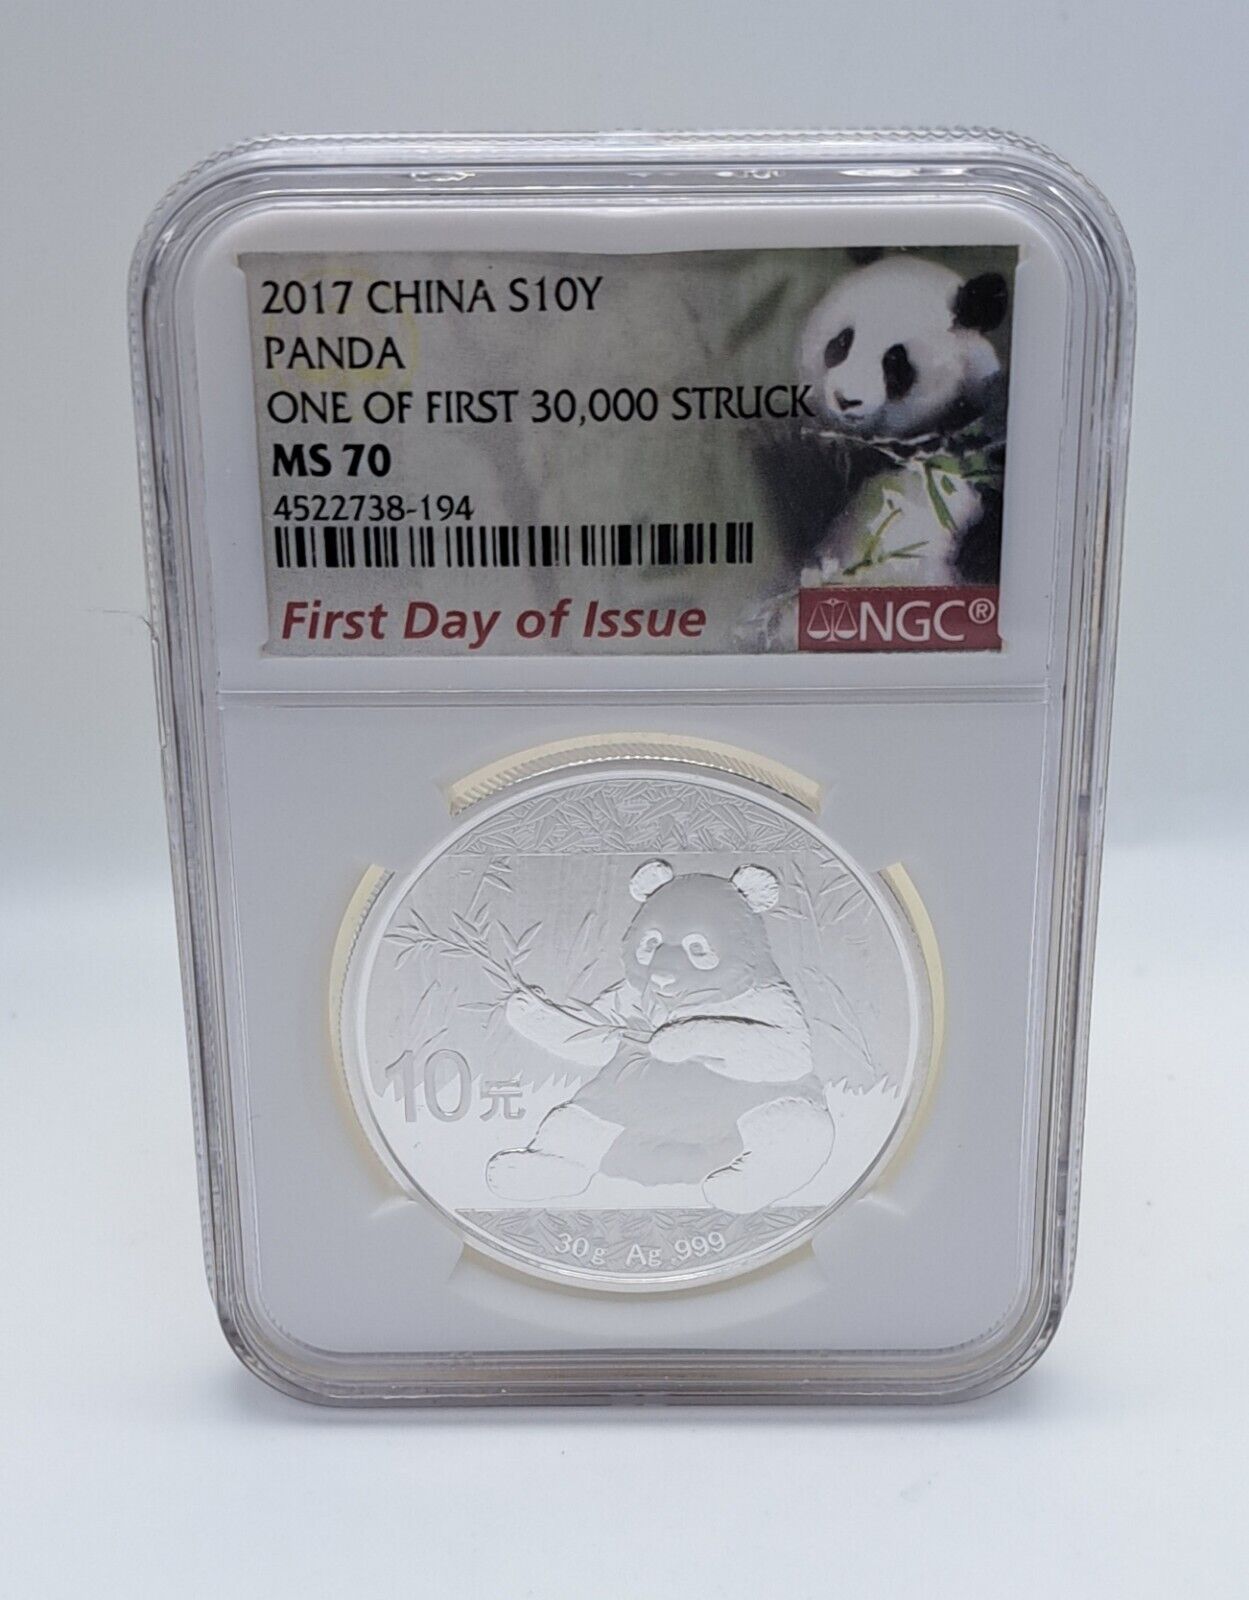 2017 China Silver Panda Ngc Ms70 Fdi Exclusive 1 Of First 30k First Day Of Issue